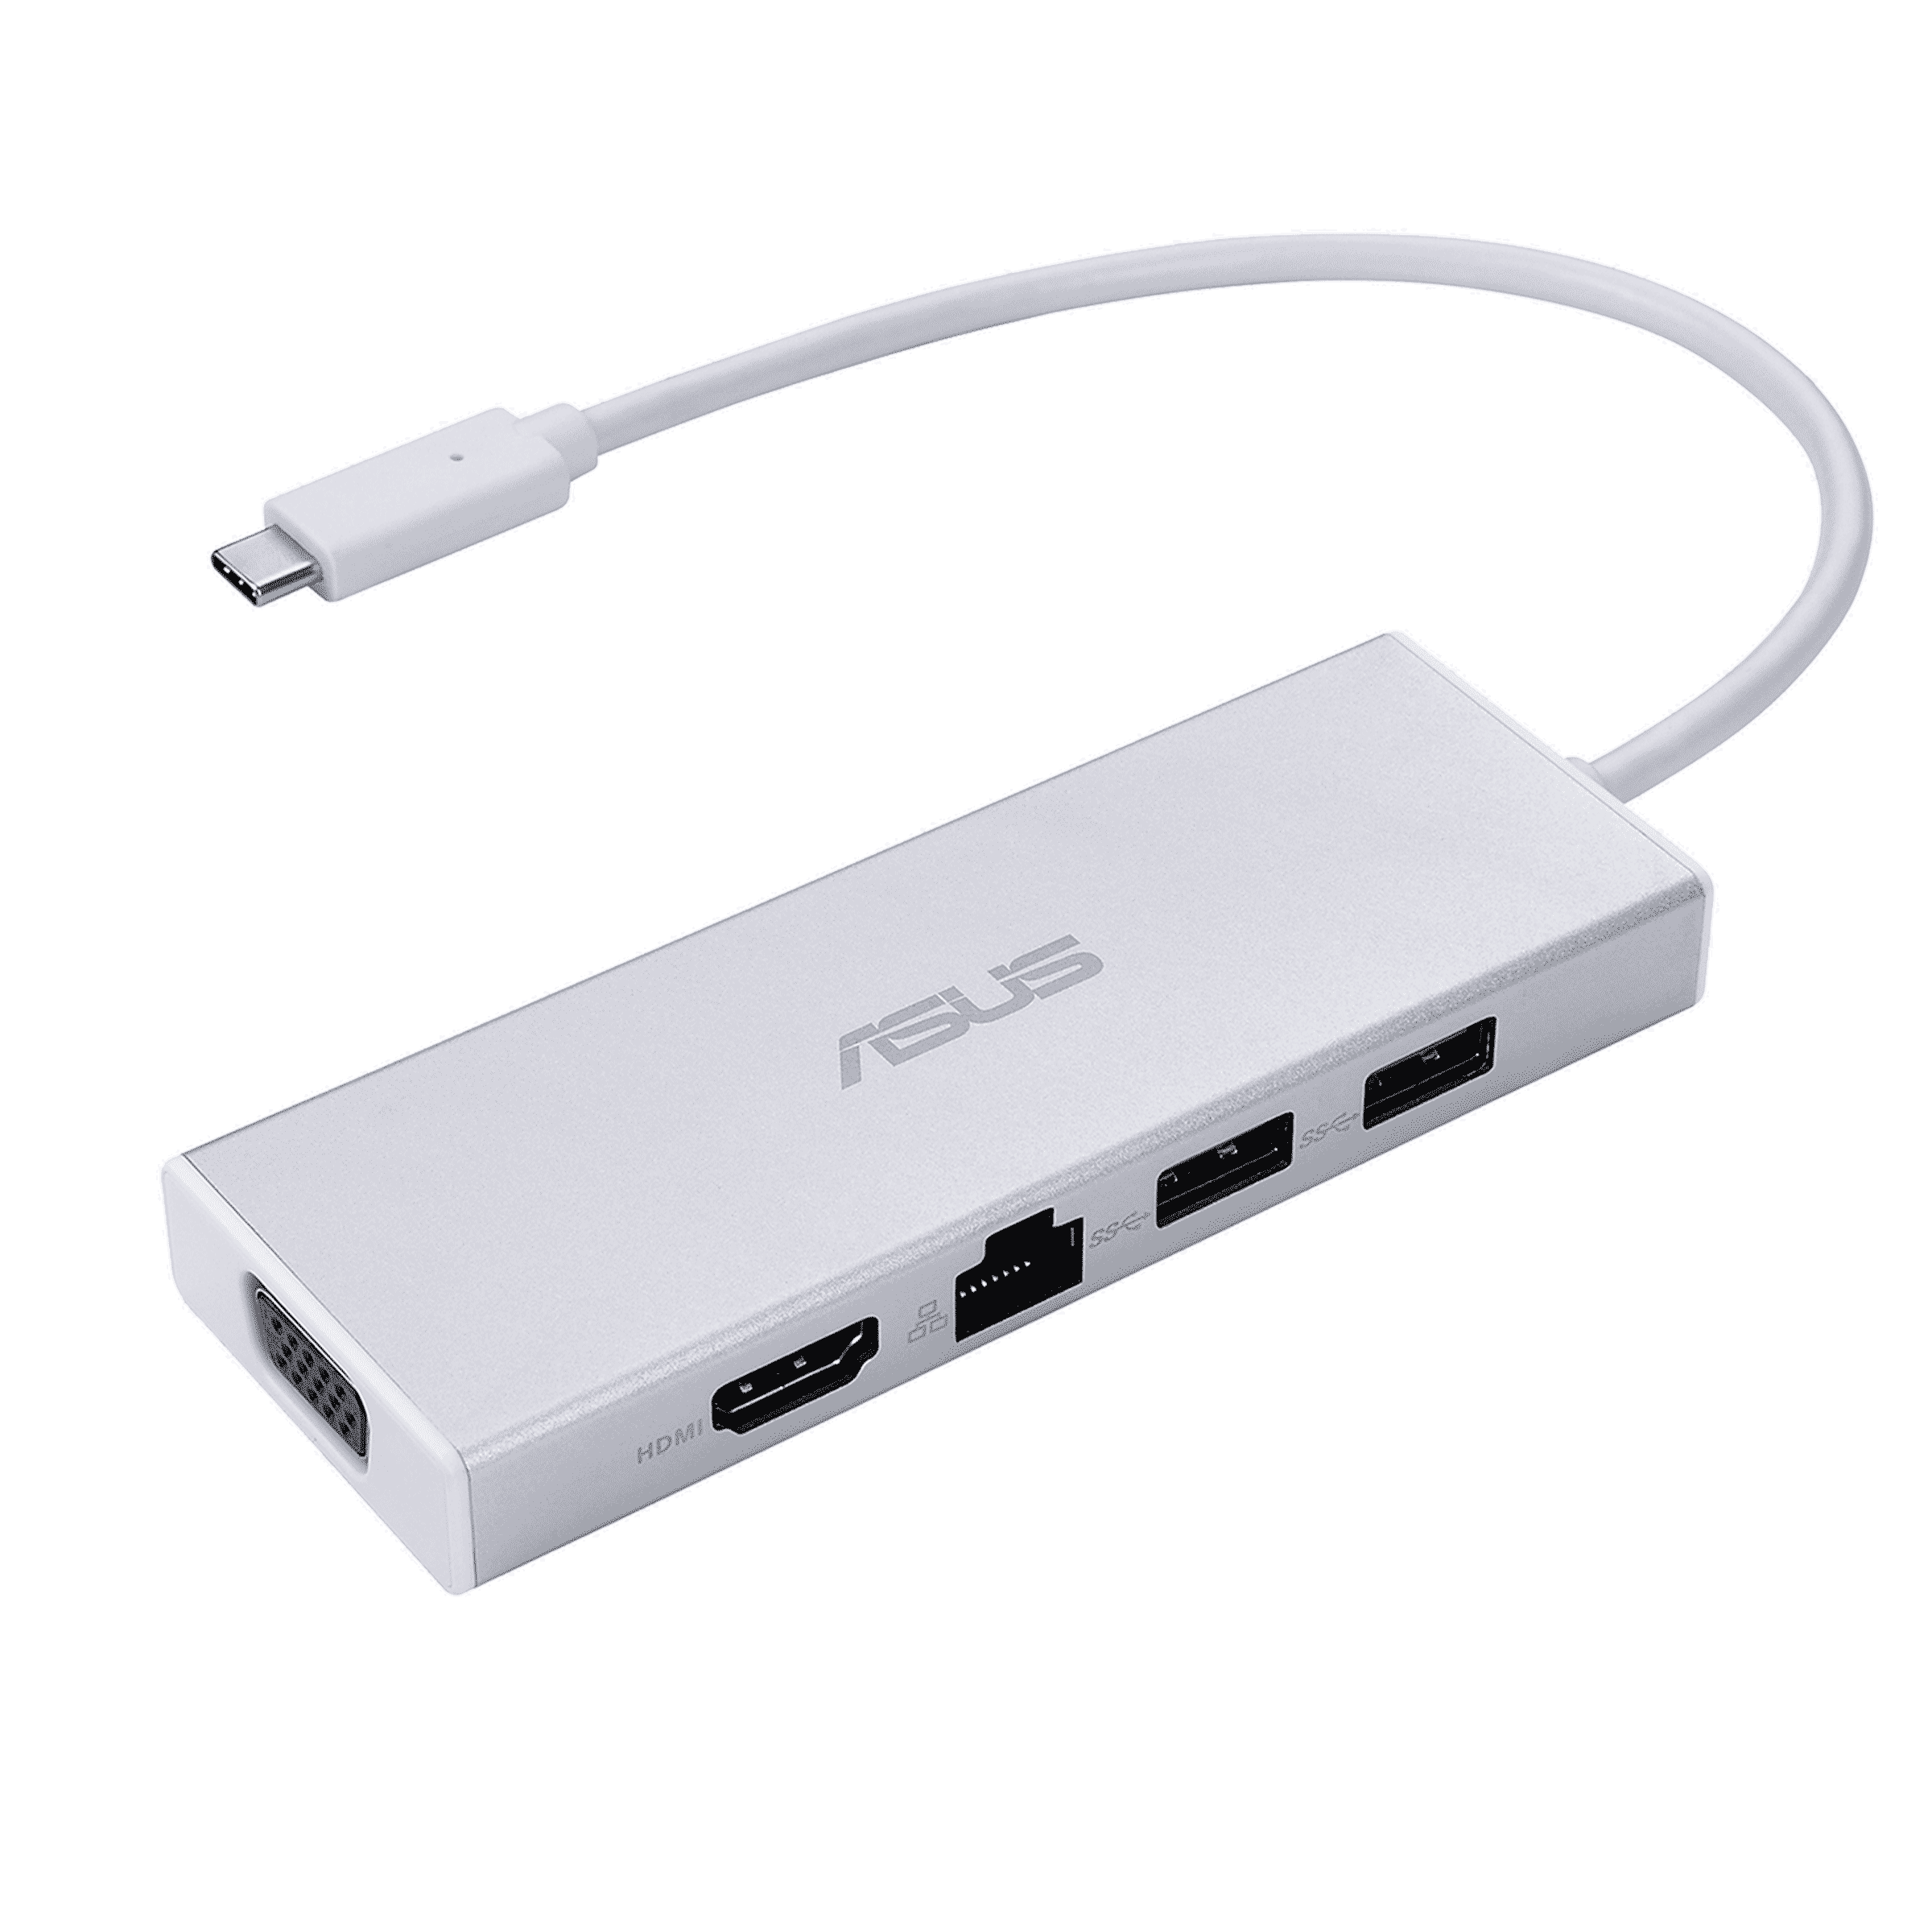 et ayı drama  ASUS OS200 USB-C DONGLE｜Docks Dongles and Cable｜ASUS Global